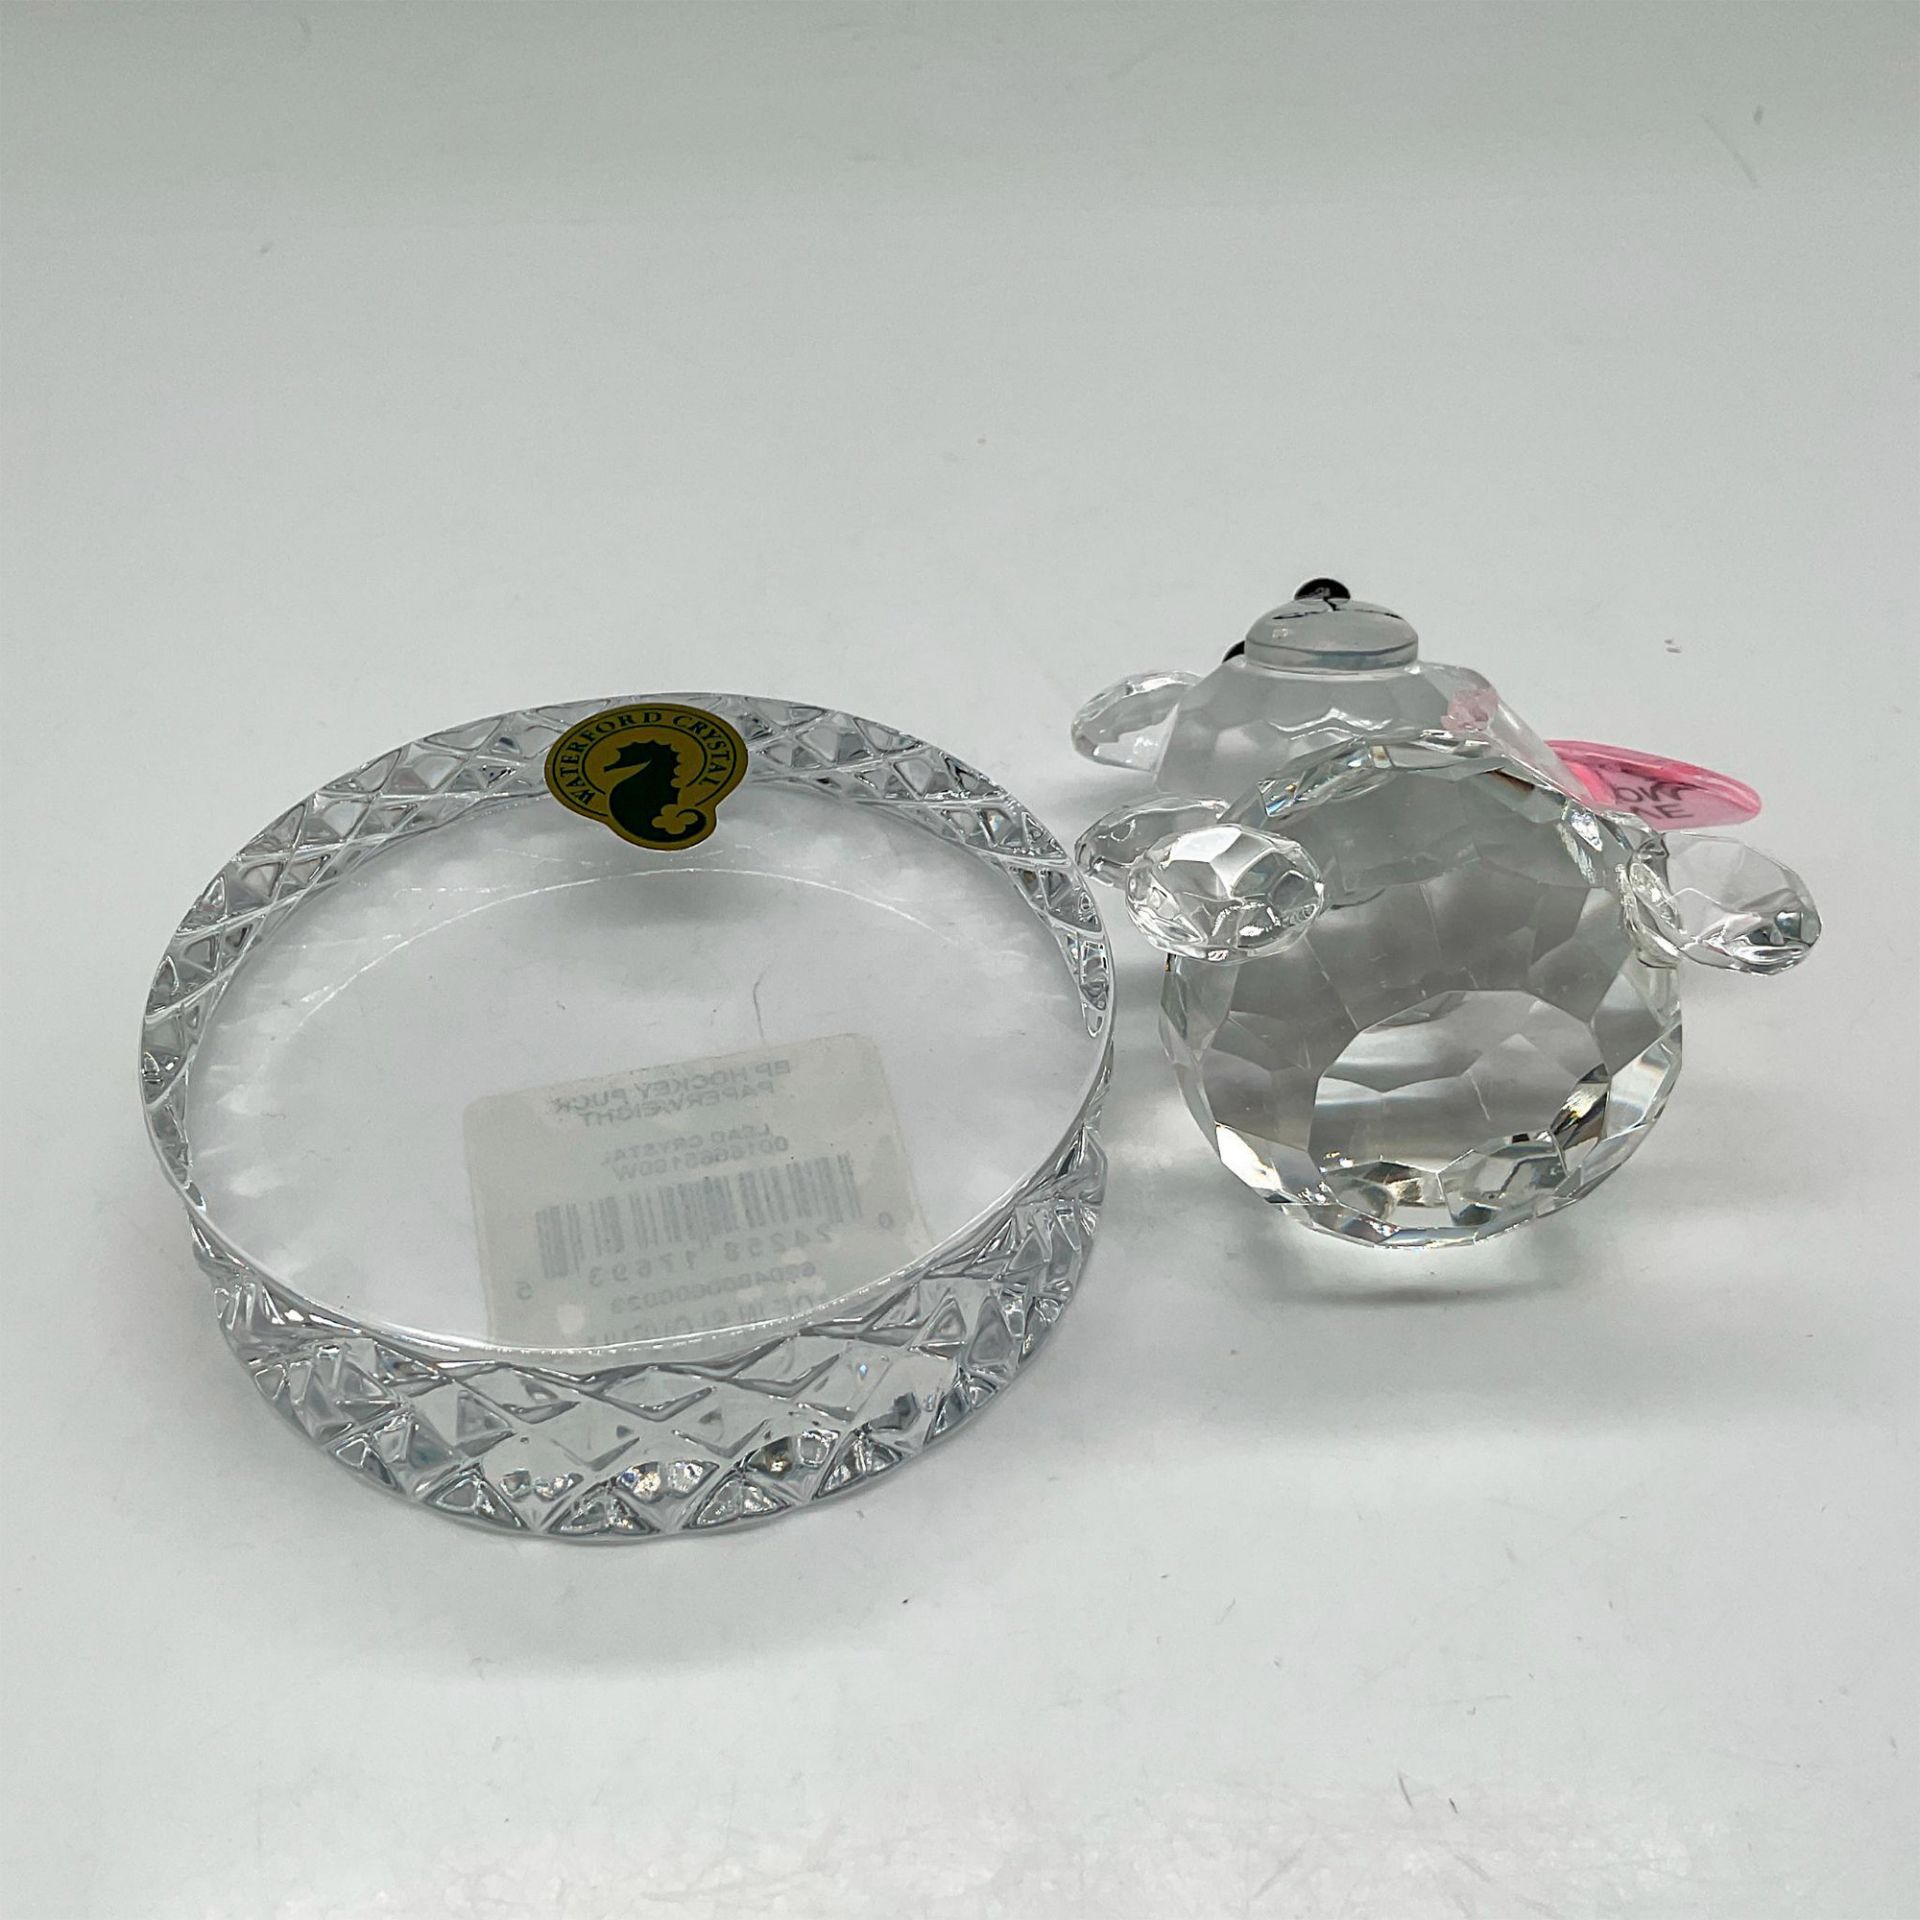 2pc Waterford Crystal Paperweight + Figurine - Image 3 of 3